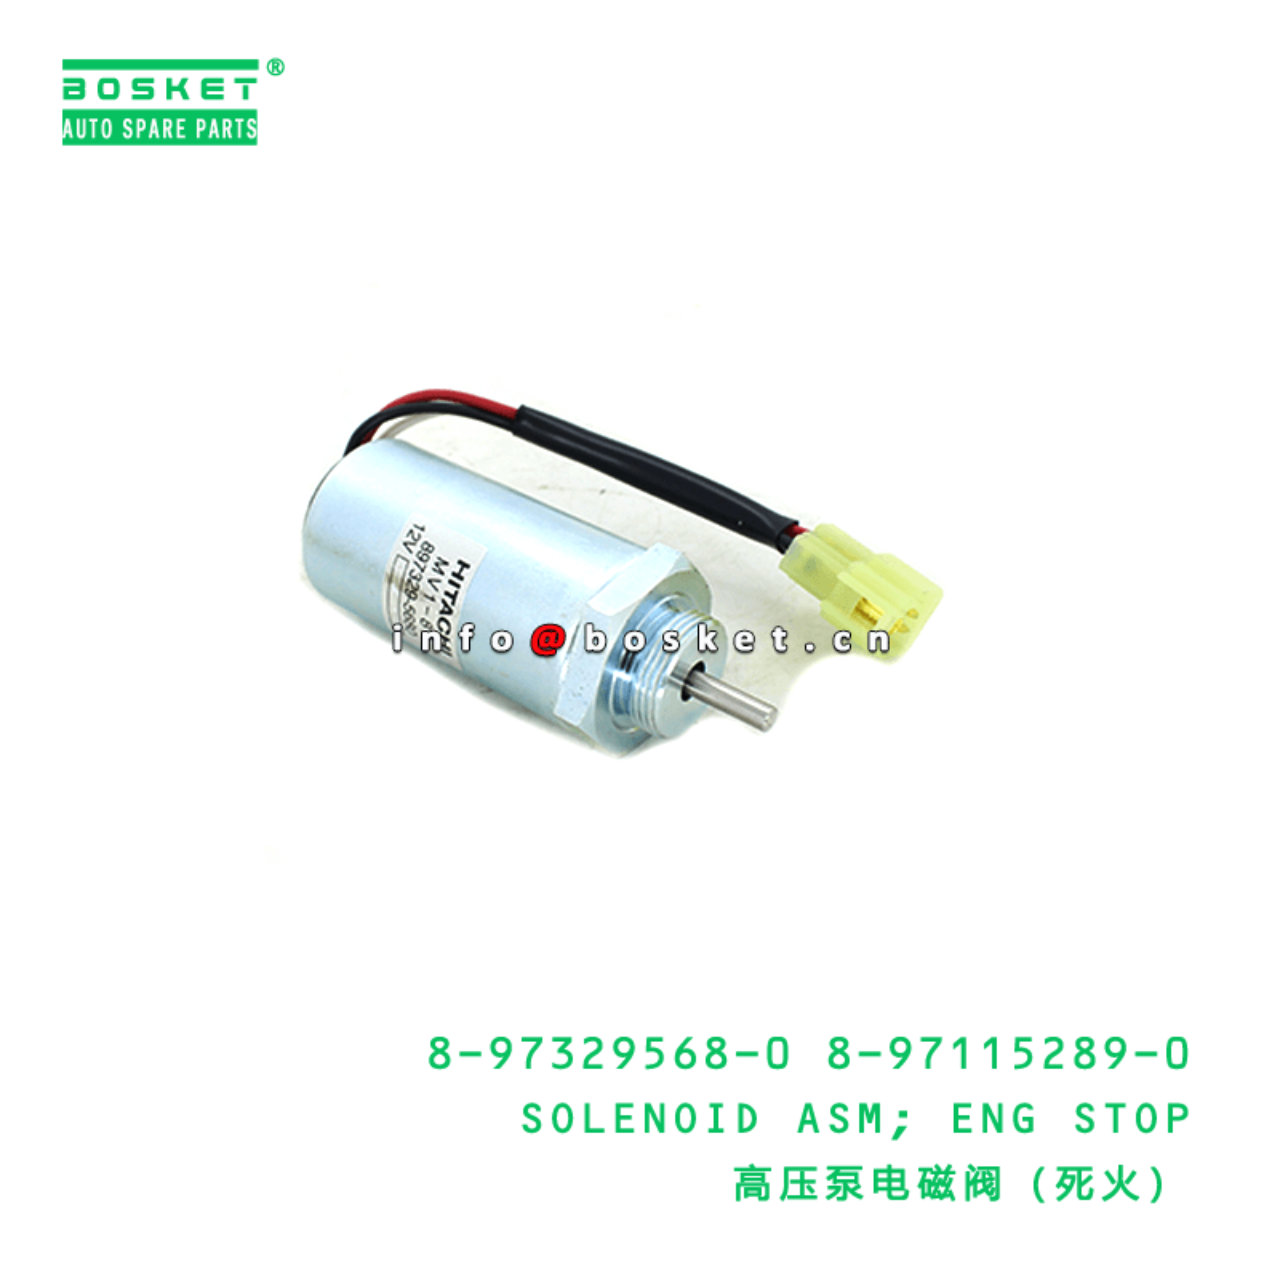 8-97329568-0 8-97115289-0 Engine Stop Solenoid Assembly 8973295680 8971152890 Suitable for ISUZU PA 